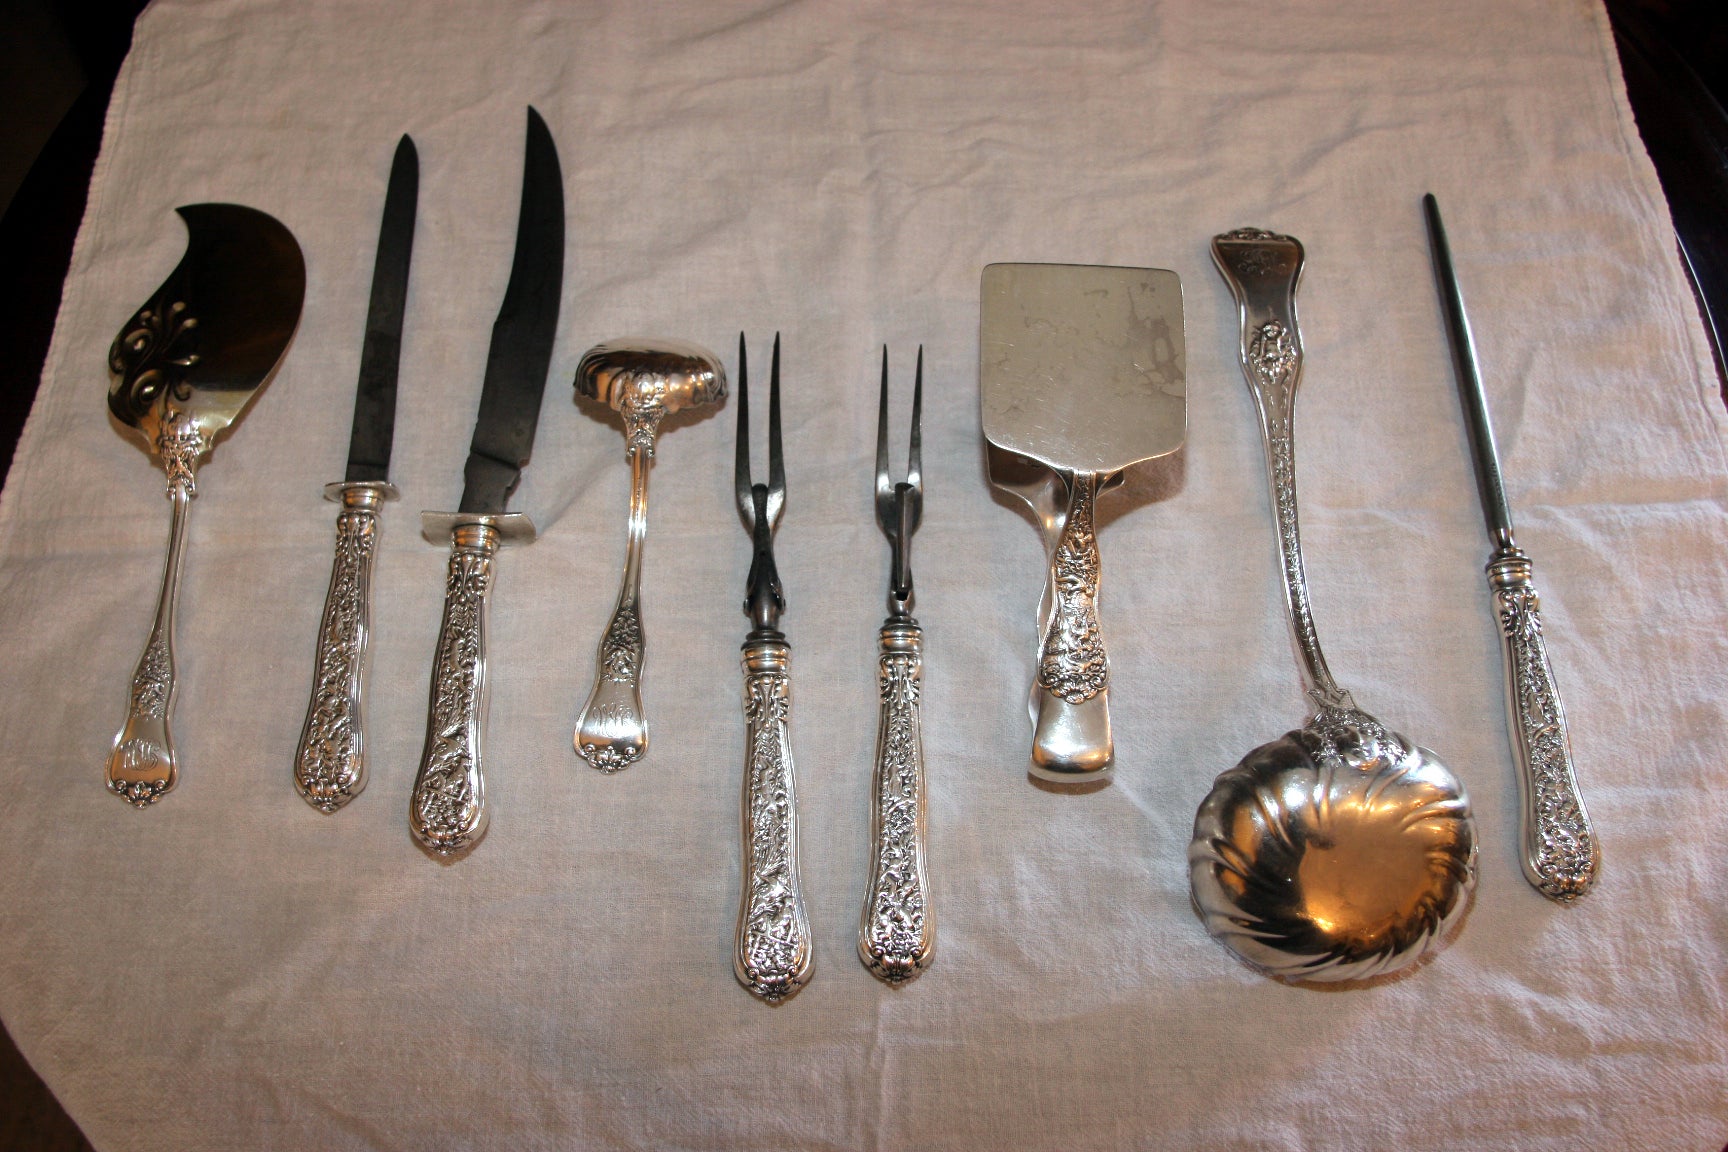 An exquisite set of antique Tiffany sterling silver serving pieces in the Olympian pattern. Comprised of 1 gravy ladle, 1 pair asparagus serving tongs, 2 large serving spoons, a 3-piece roast serving set, 2 serving forks, 1 fish server (vermeil